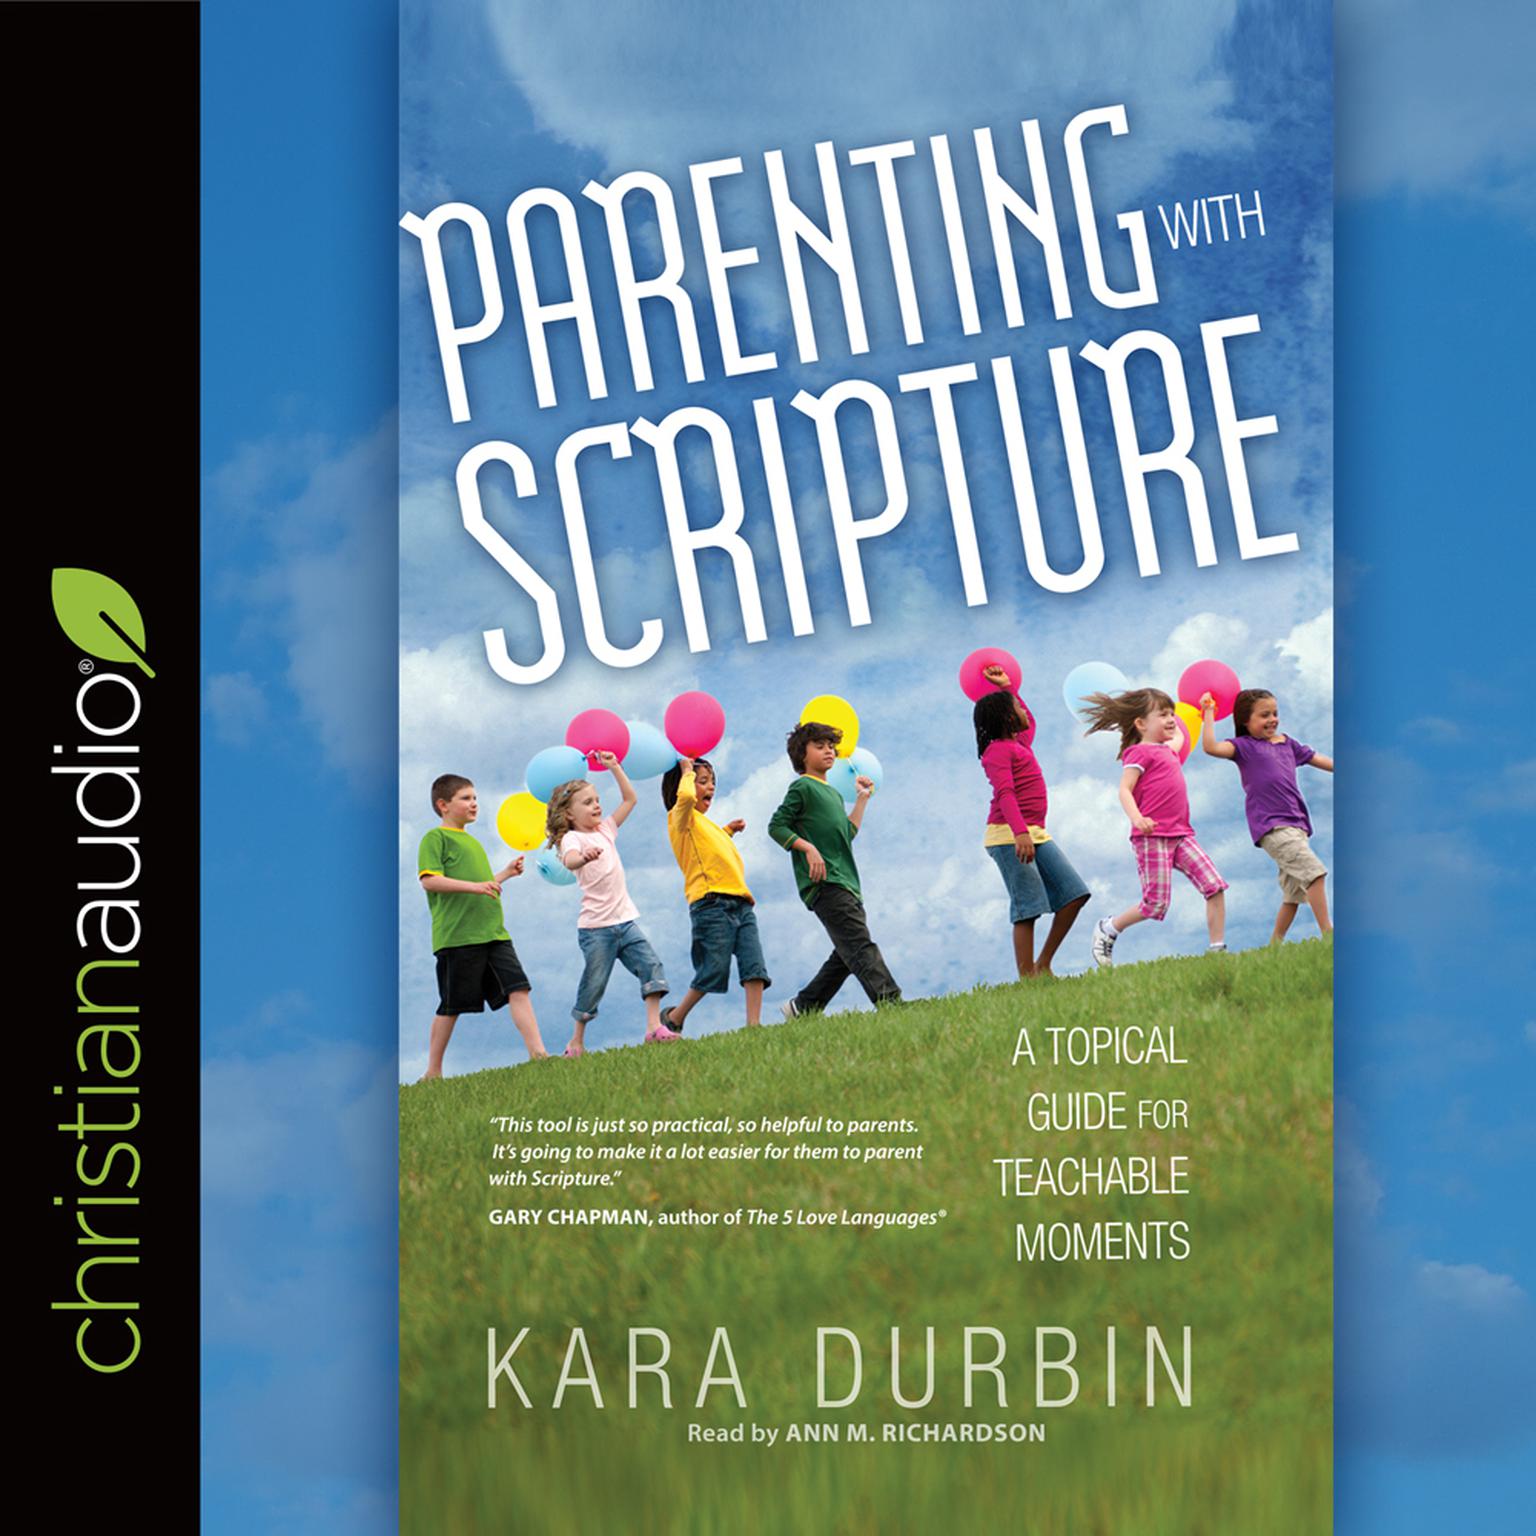 Parenting with Scripture: A Topical Guide for Teachable Moments Audiobook, by Kara Durbin